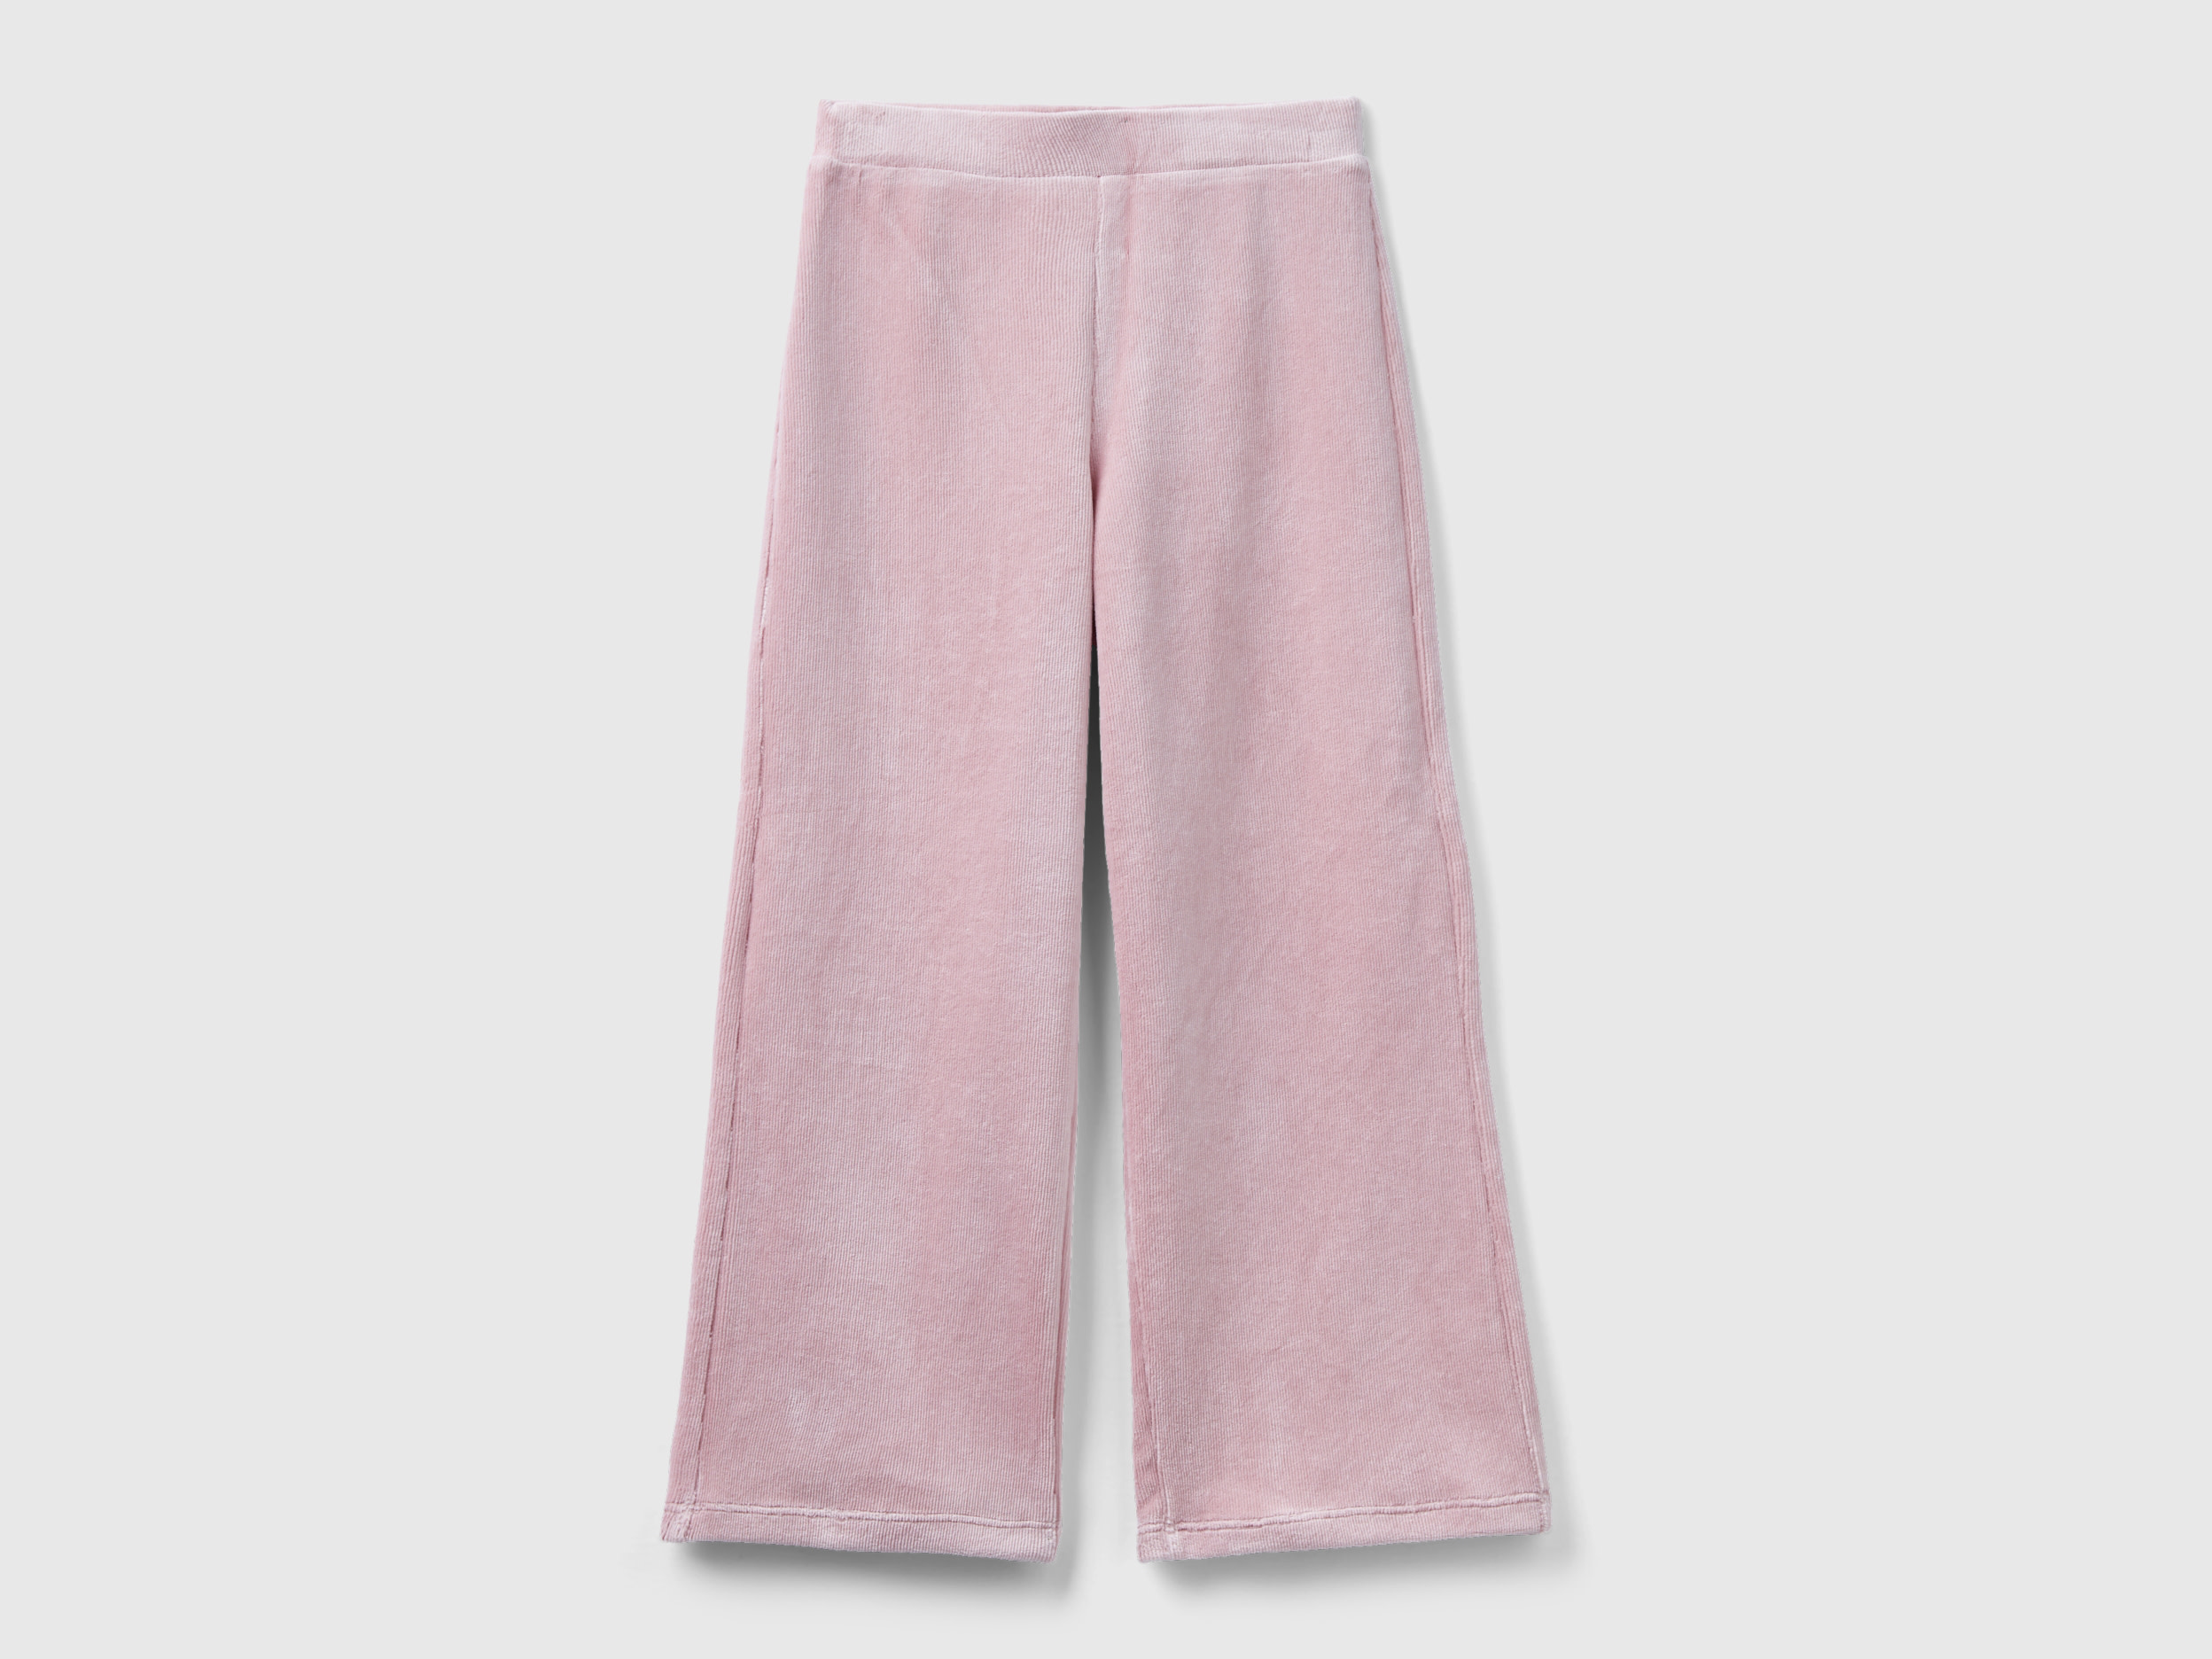 Benetton, Wide Chenille Trousers, size 3XL, Pink, Kids